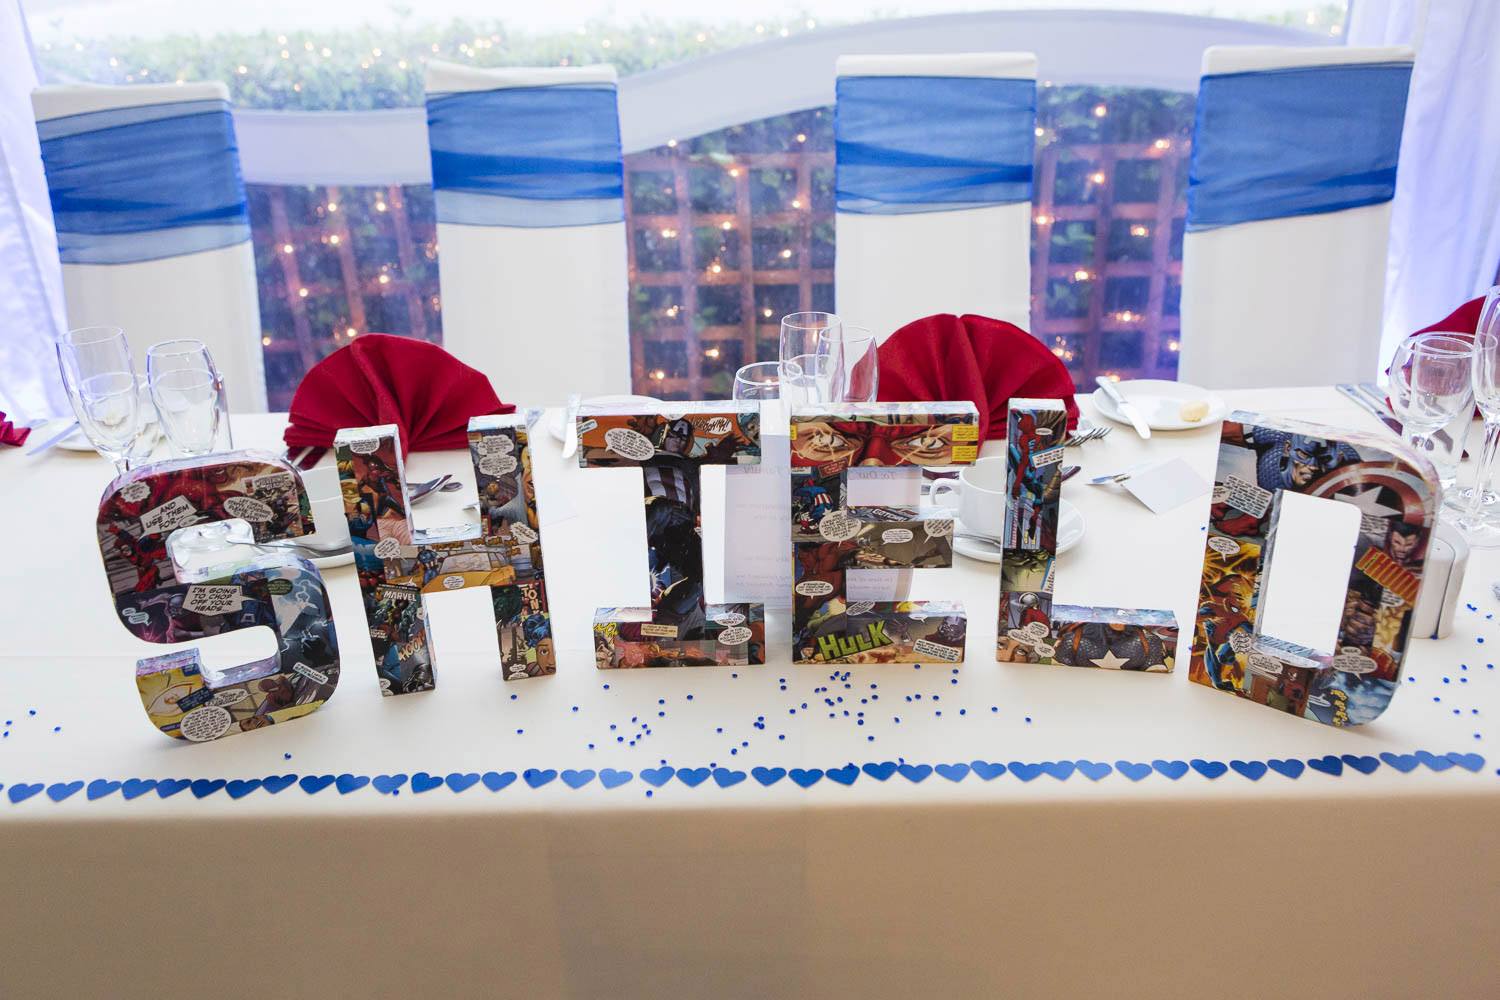 Guests marvel at the creative table settings, featuring superhero-themed place cards and favors